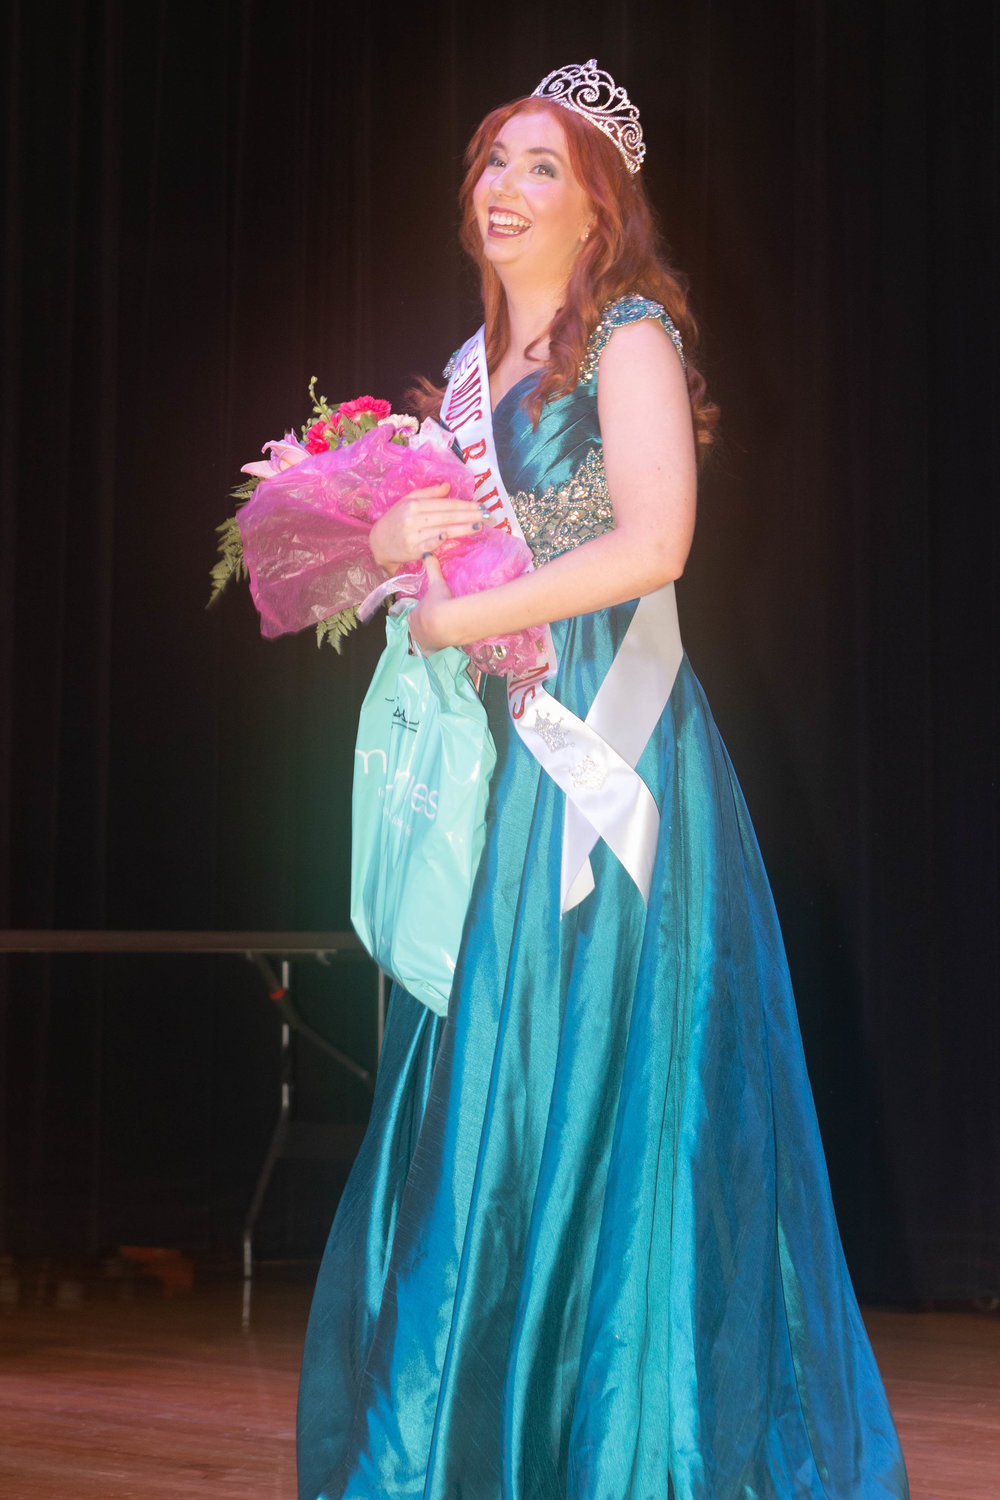 Sophia Milhollin walks the stage after being named Miss Railroad Days 2022.